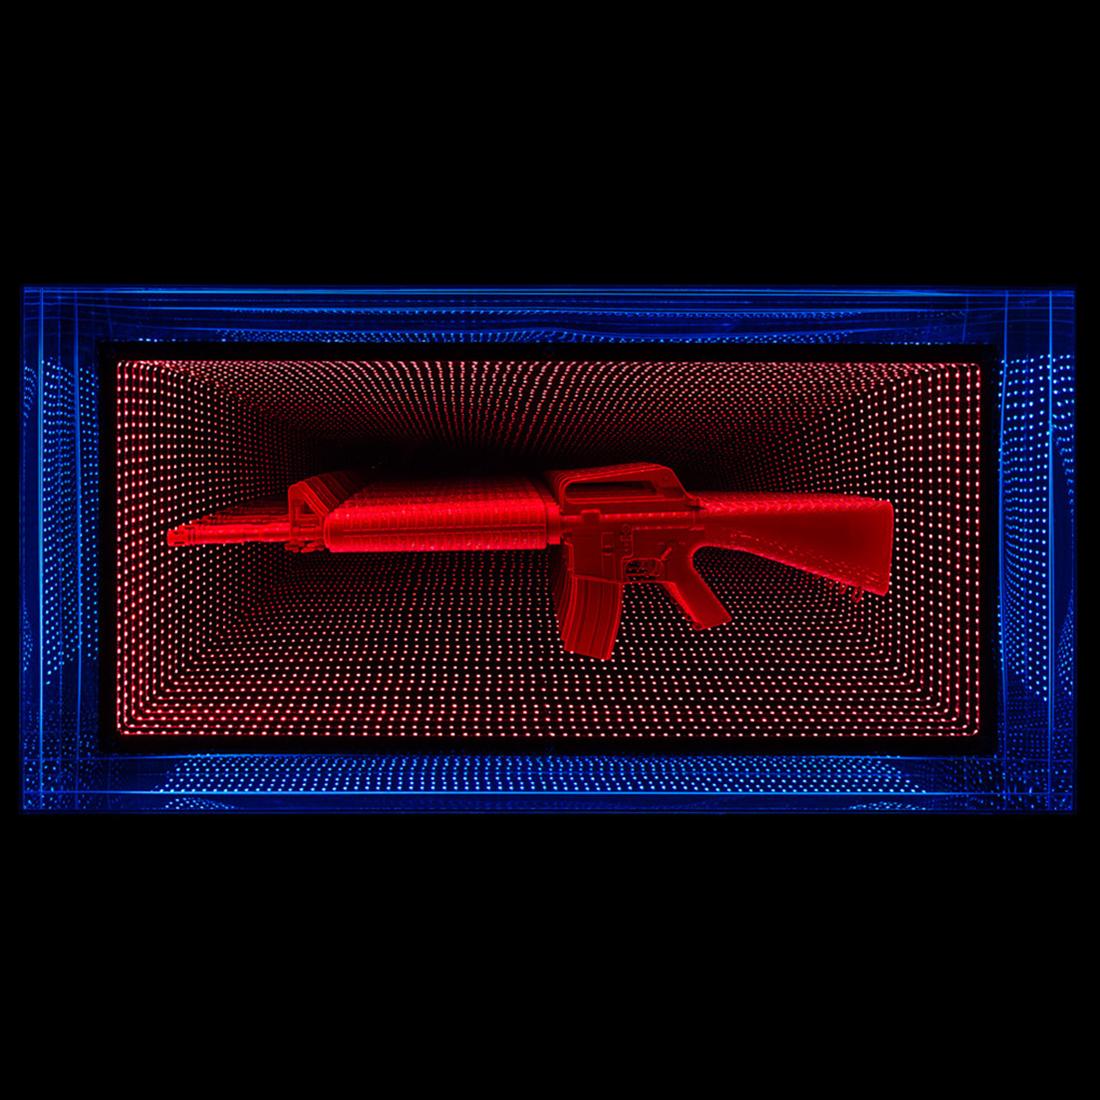 Mirror M16 Led Light wall decoration mirror made
with mirrored led lights with glass and plexiglass
creating an infiny mirrored effect. With an art demo
gun M16 in resin. Exceptional piece made in 2020
by Raphael Fenice.